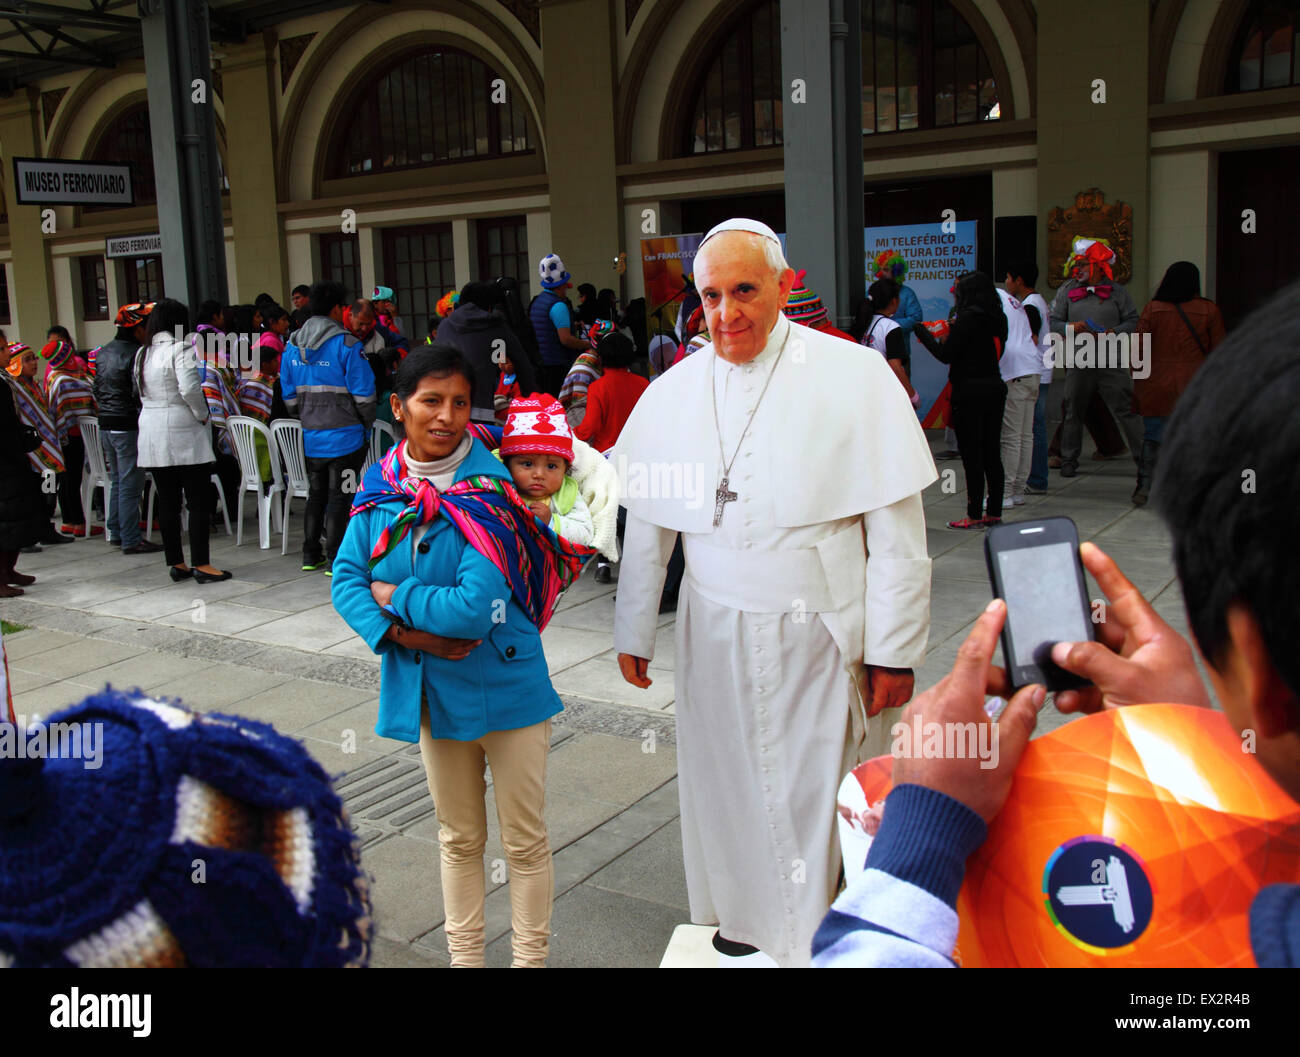 La Paz, Bolivia, 5th July 2015. A local lady and her baby pose for a photo with a life size cardboard cutout of Pope Francis at an event to celebrate his forthcoming visit to Bolivia. Pope Francis will visit La Paz on 8th July during his 3 day trip to Bolivia. Stock Photo